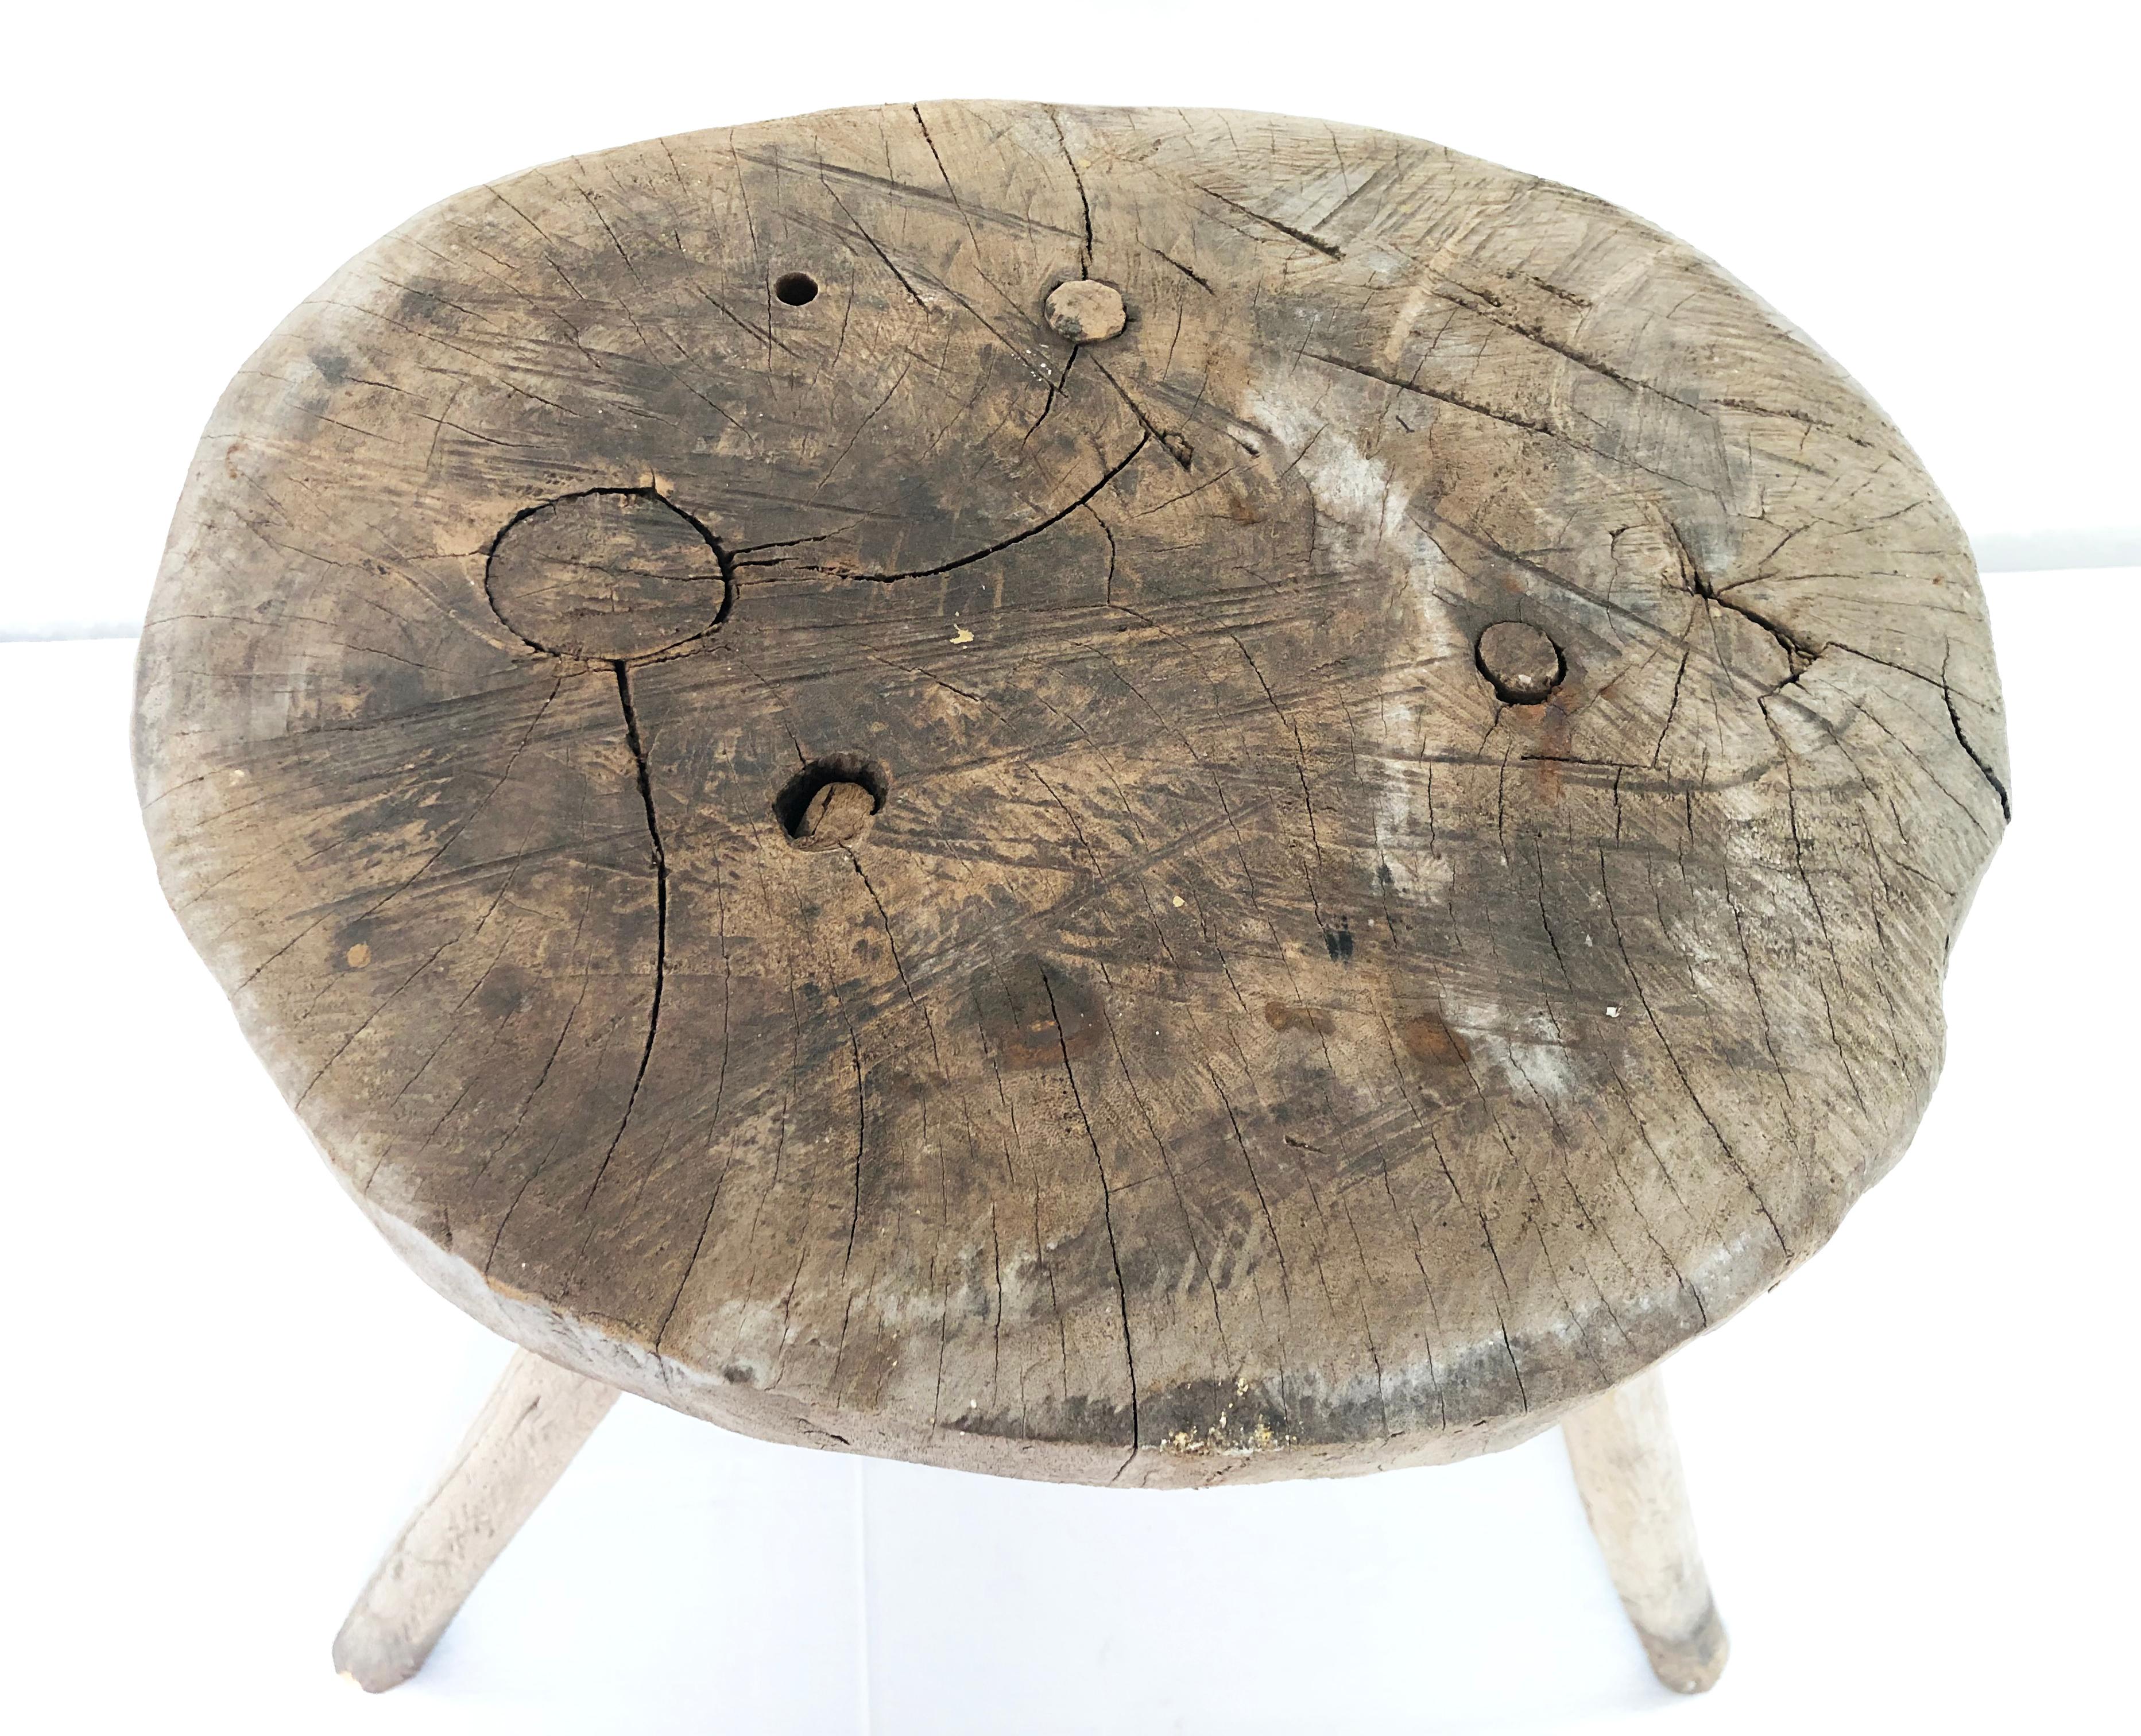 Antique natural mezquite milking stool wood stool with thick round top found in Western Mexico.
Great for side table or next to a tub.